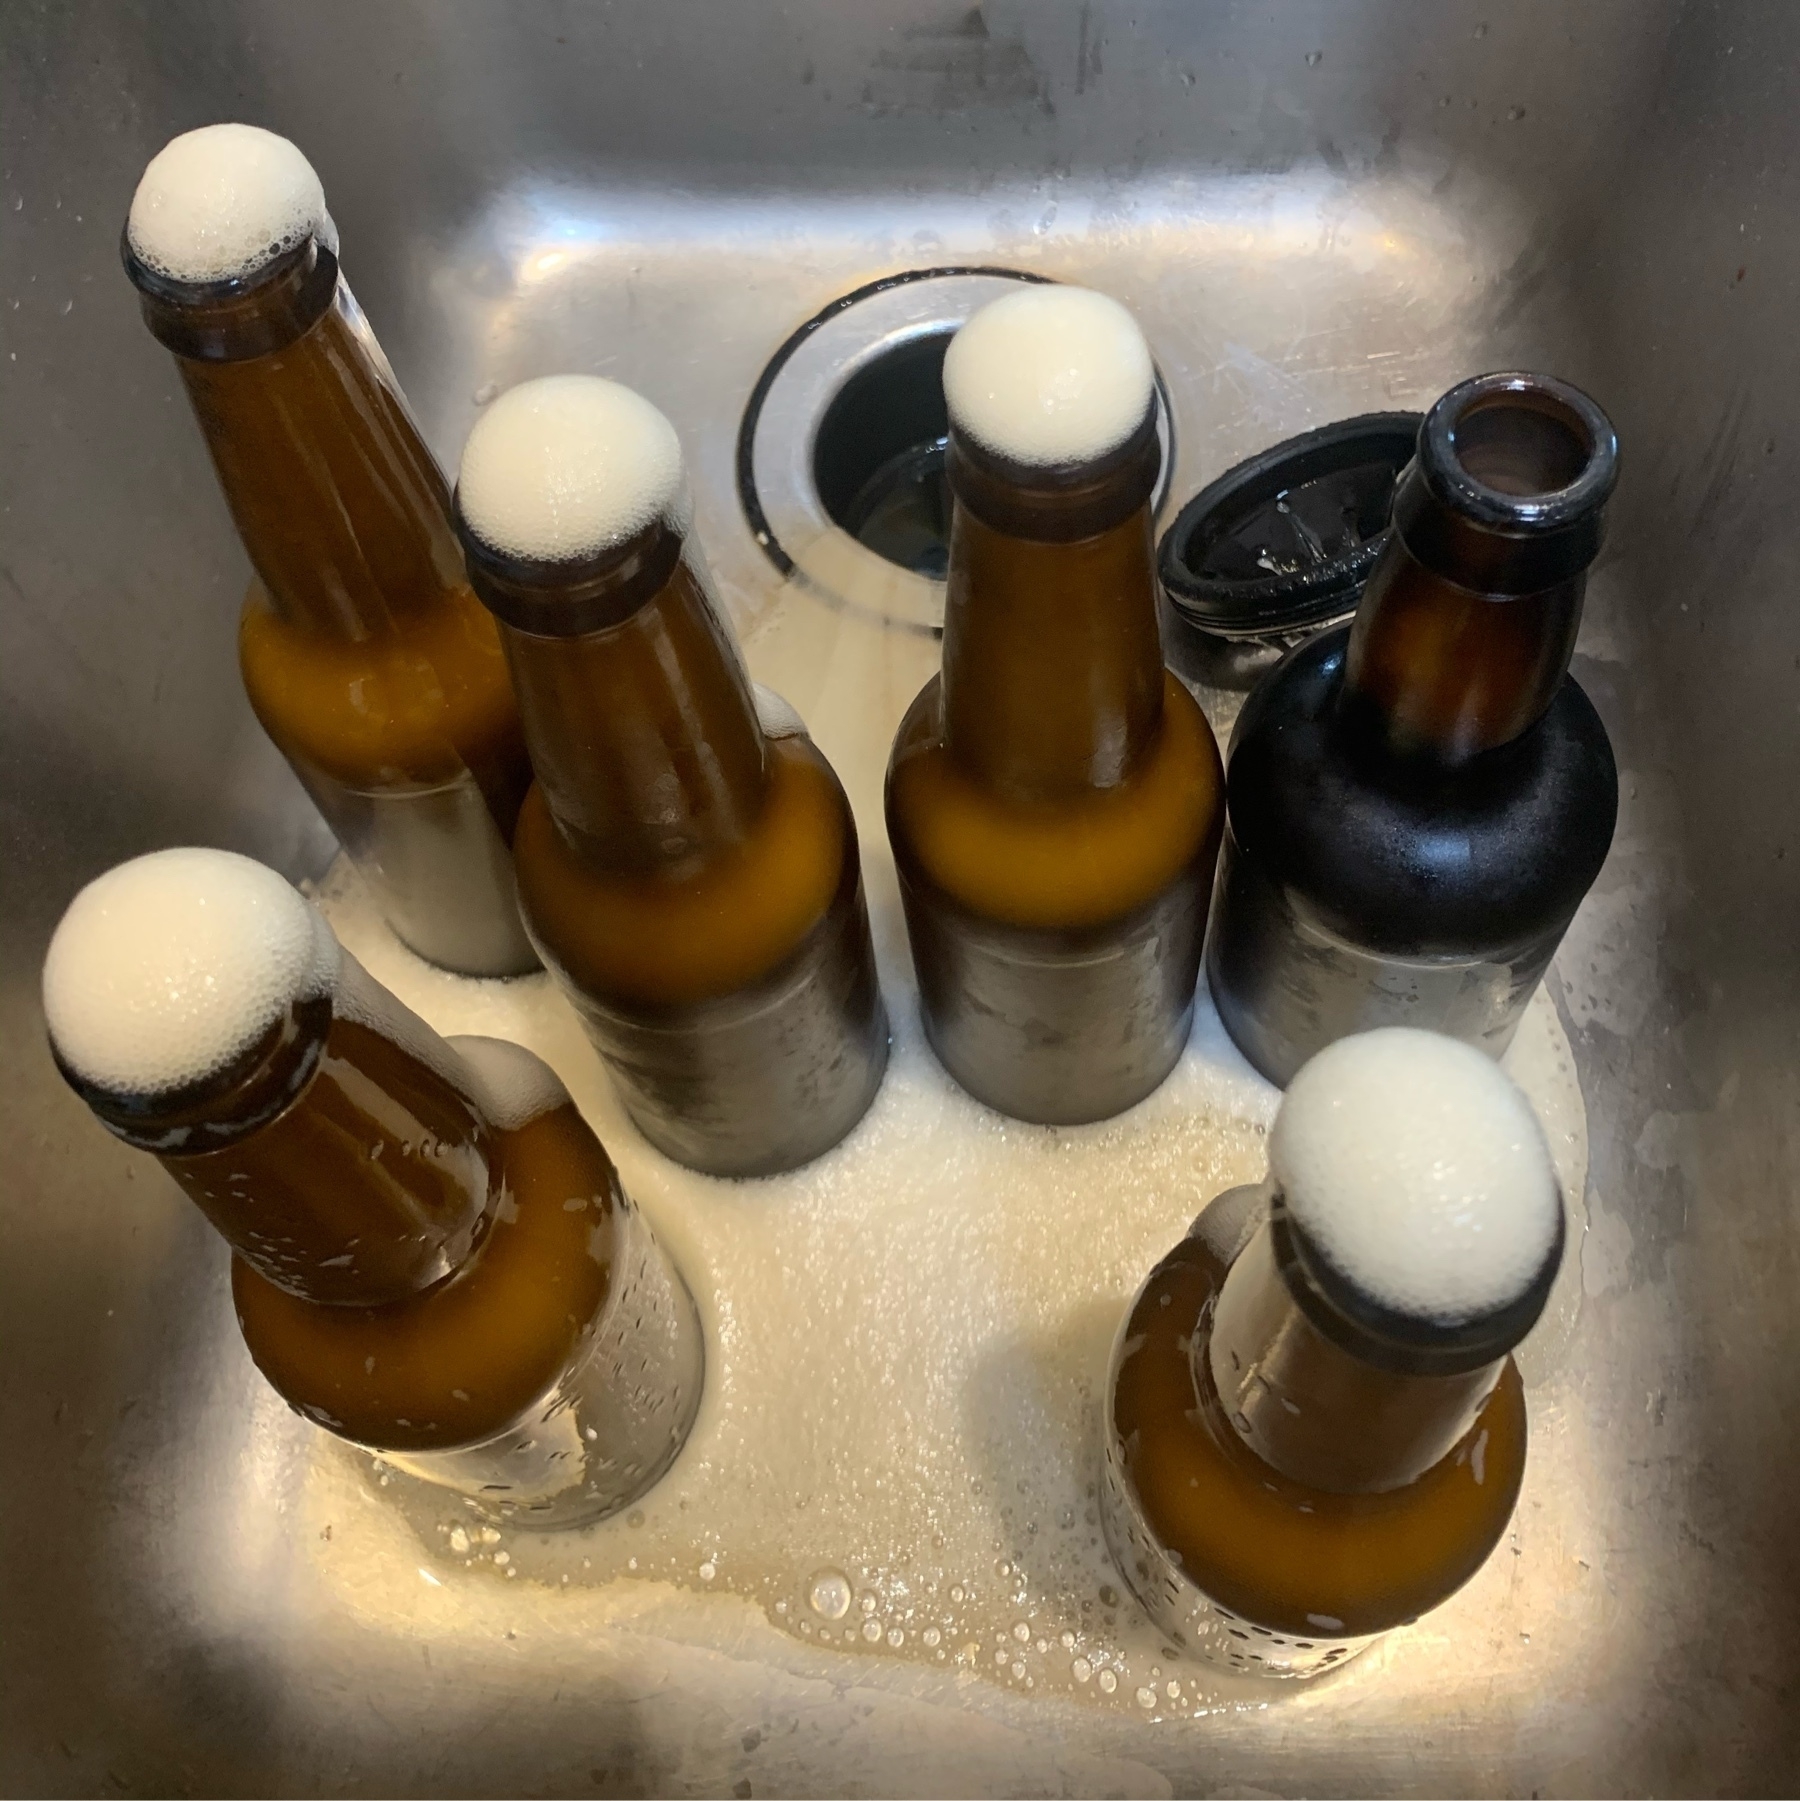 Bottles of my beer erupting in foam as Inpour them down the sink. 